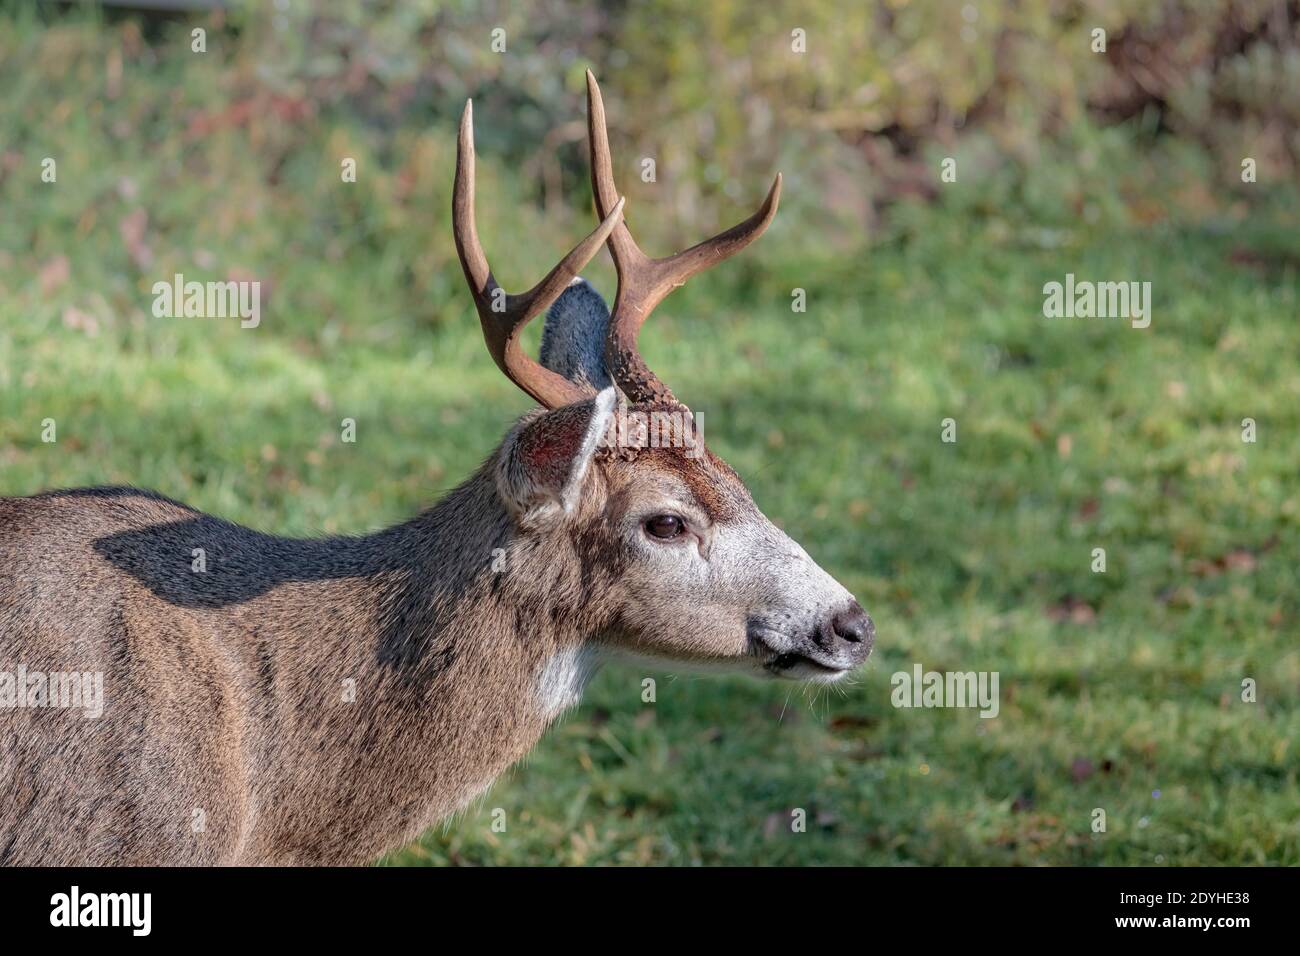 Looking relaxed but vigilant, a mature male blacktail deer with sharp, smooth antlers enjoys some winter sunshine on a green backyard lawn. Stock Photo